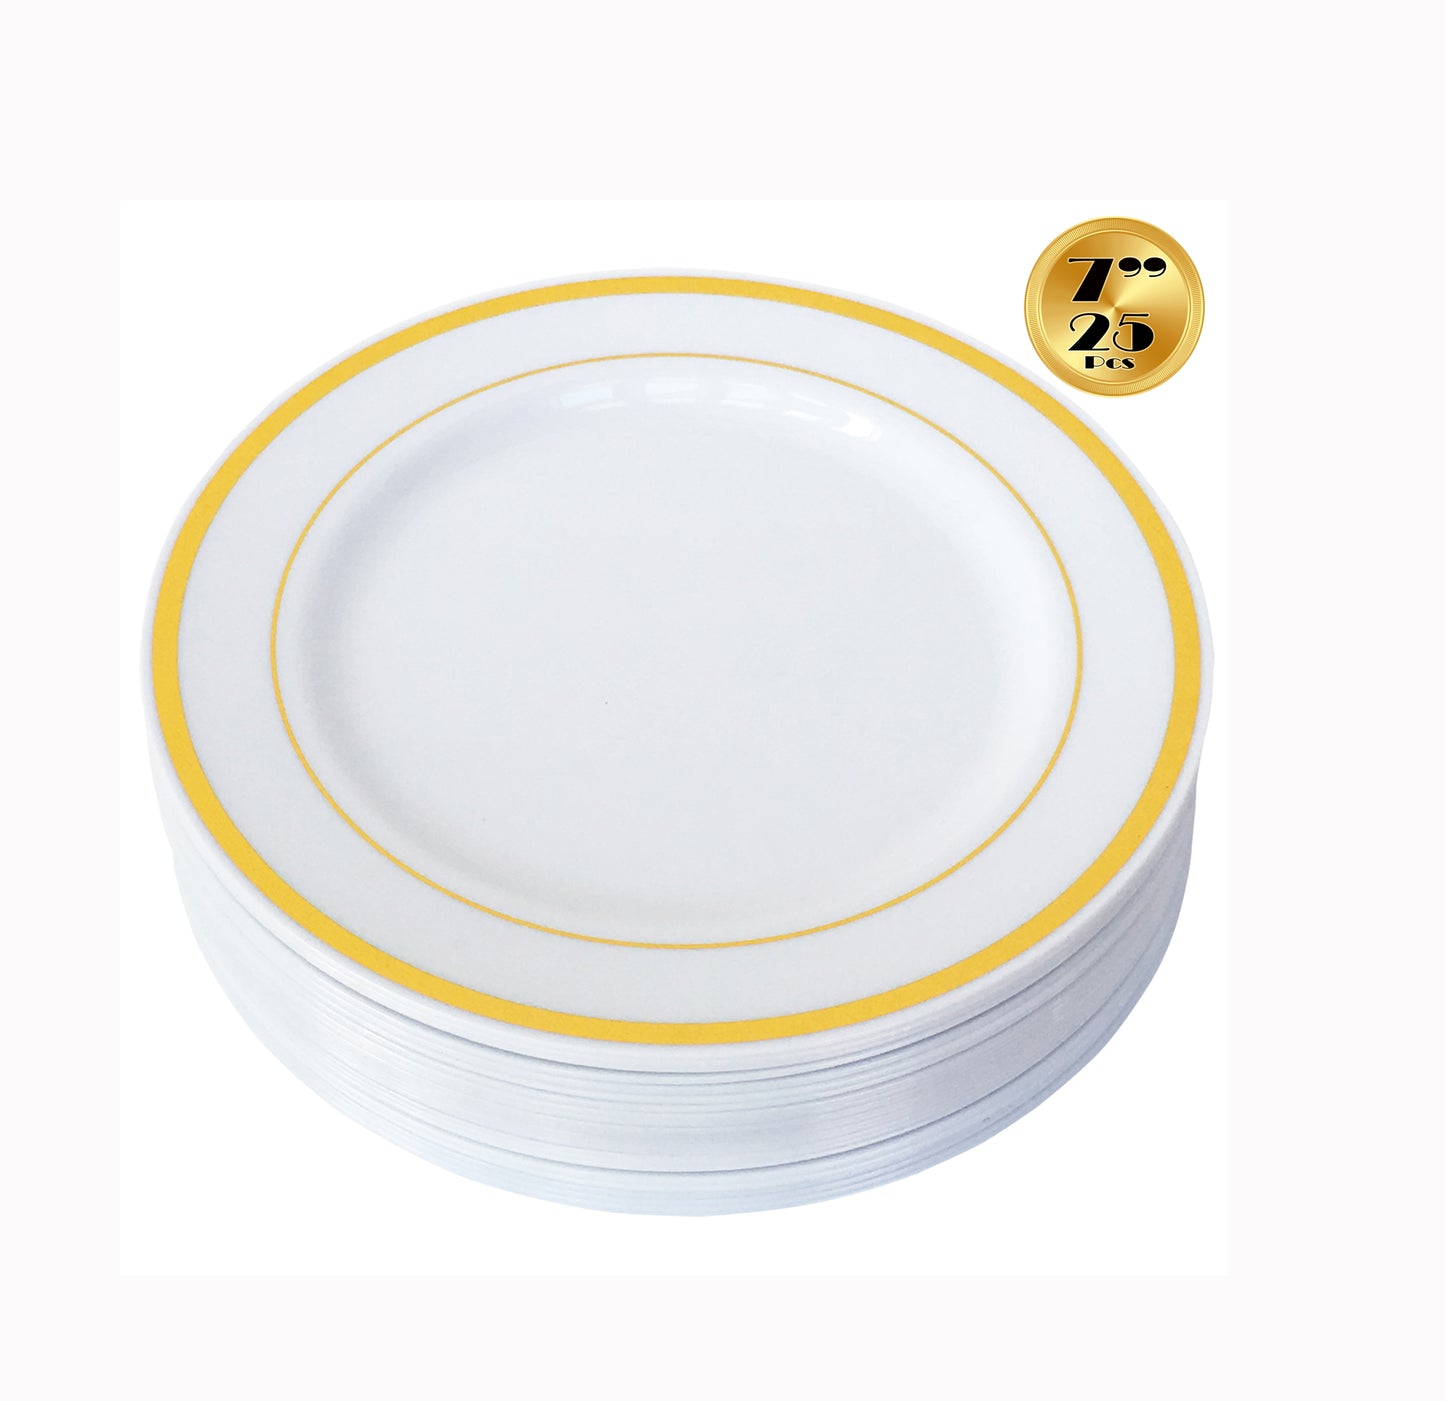 JL Prime 25 Piece 7 Inch Gold Plastic Salad/Dessert/Cake Plates Bulk Set, Heavy Duty Reusable Disposable Plastic Plates with Gold Rim for Party and Wedding